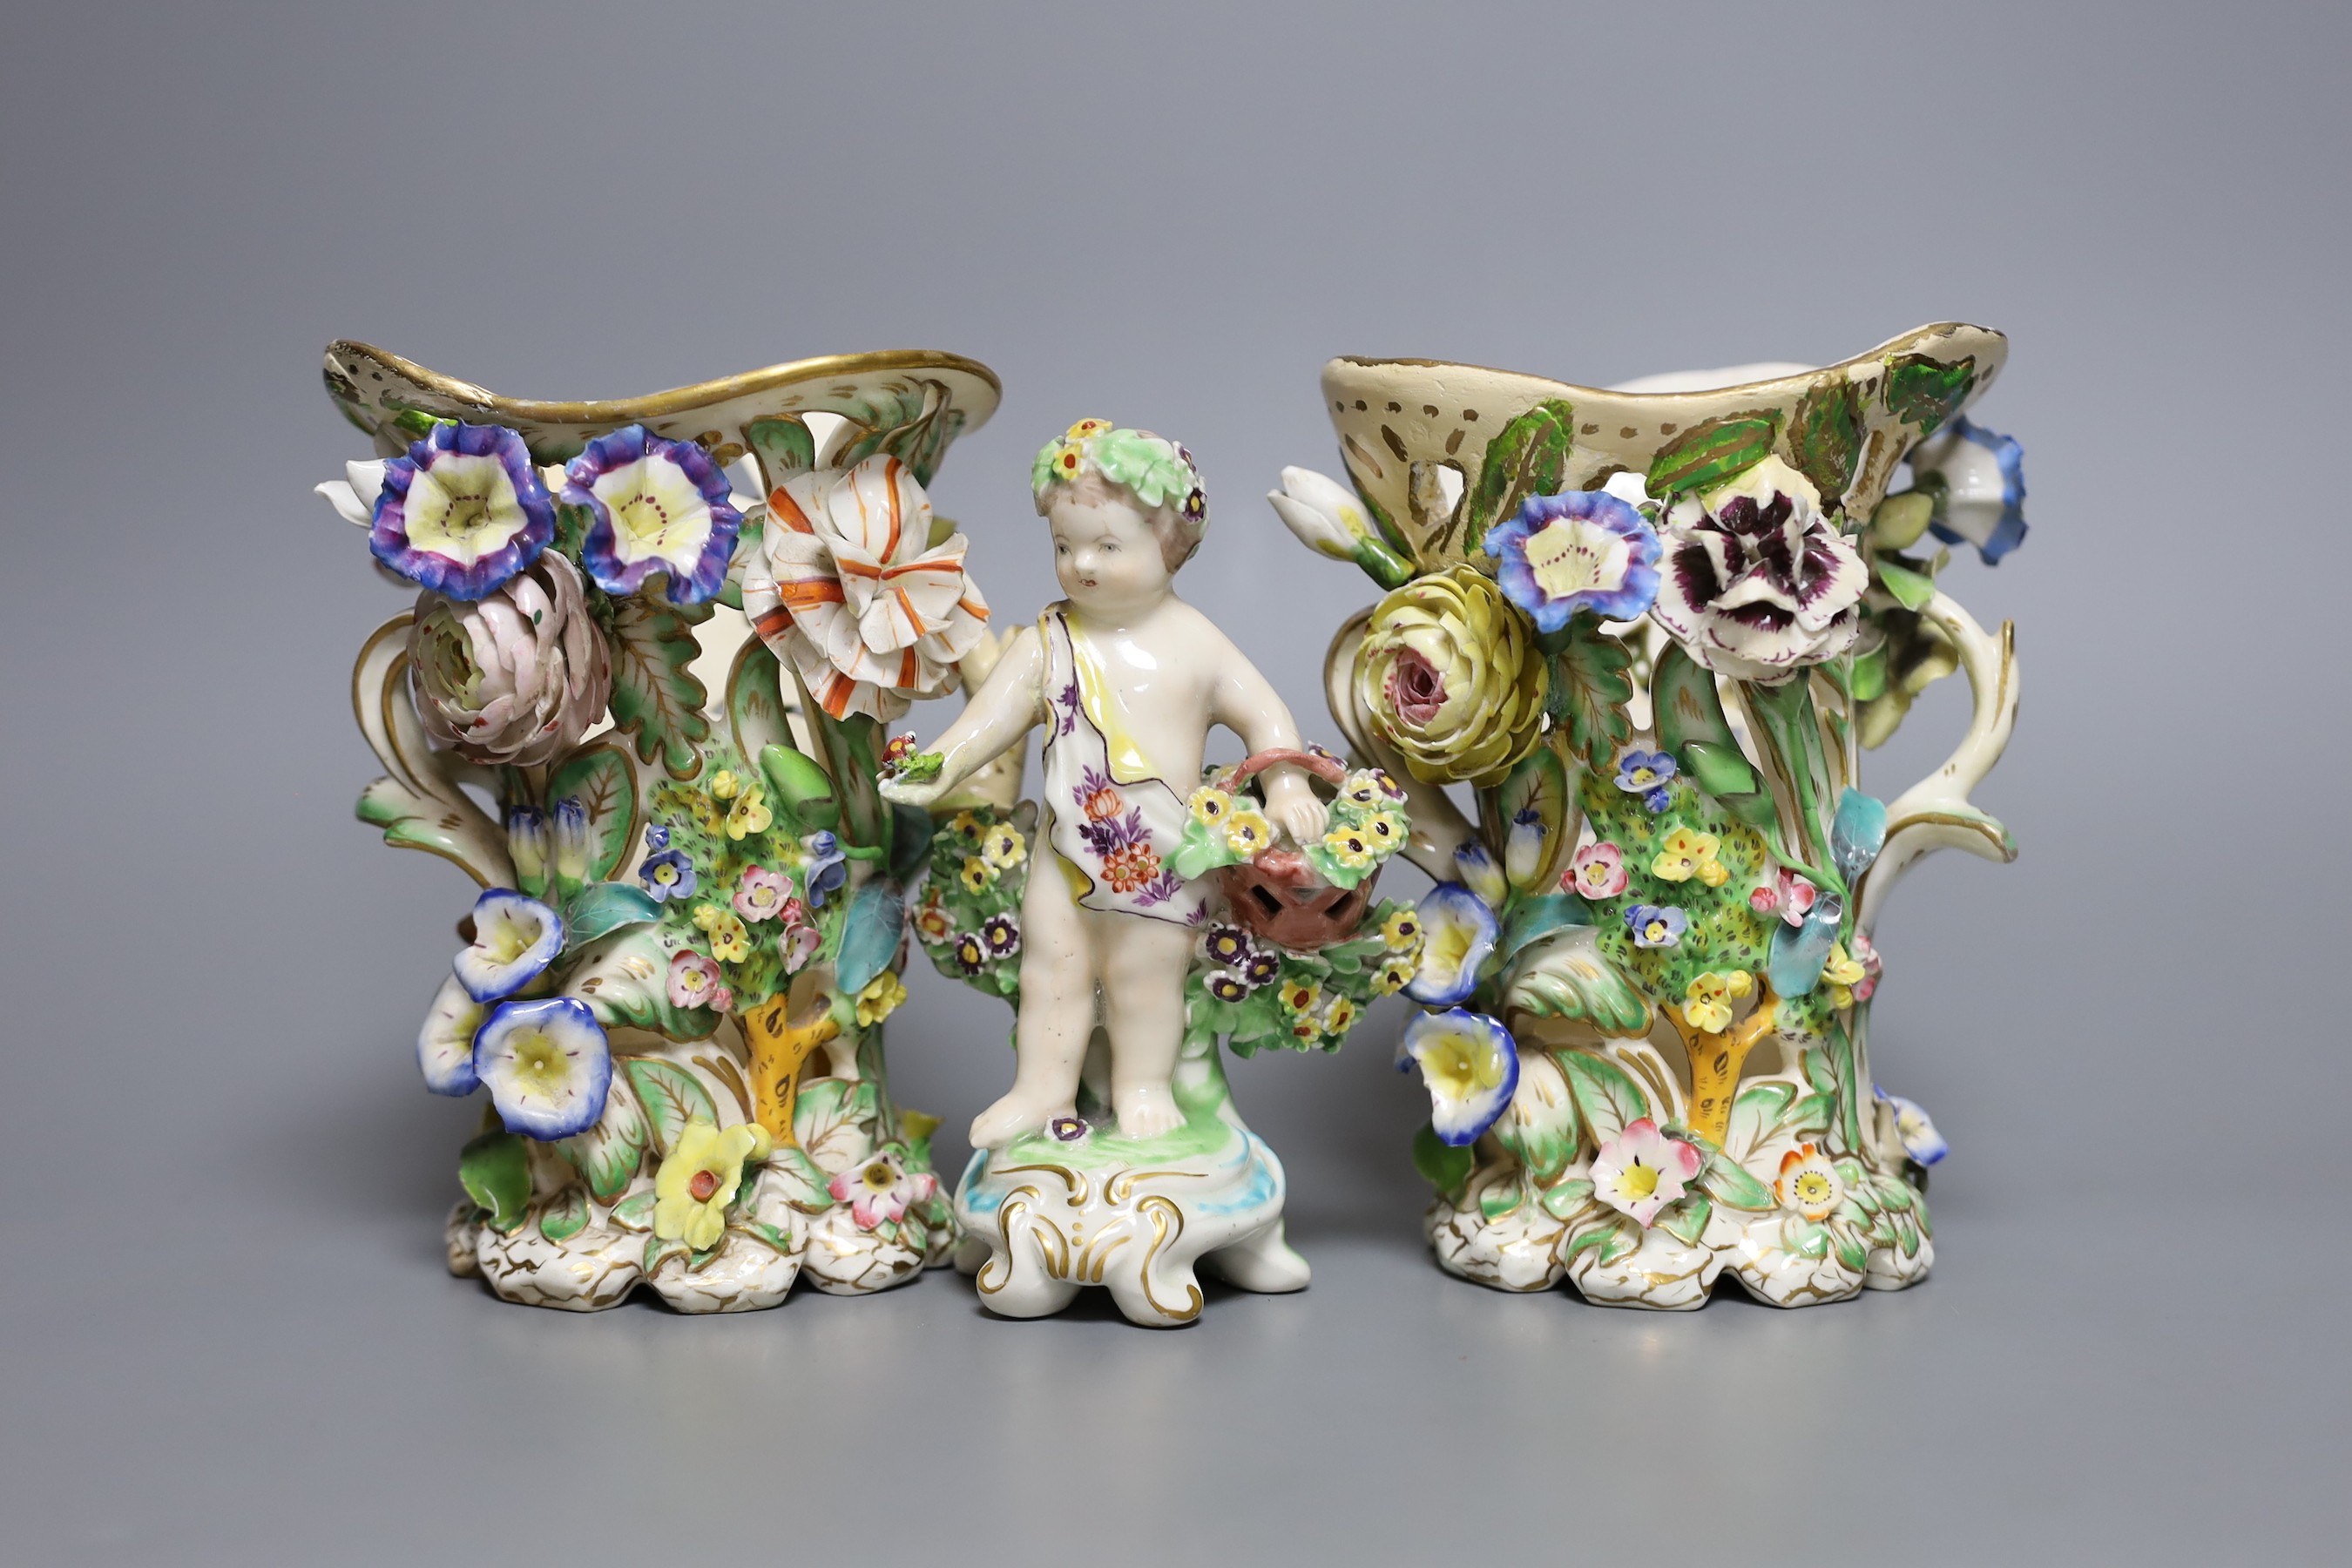 A 19th century Derby figure of a putti with flowers together with two floral encrusted porcelain